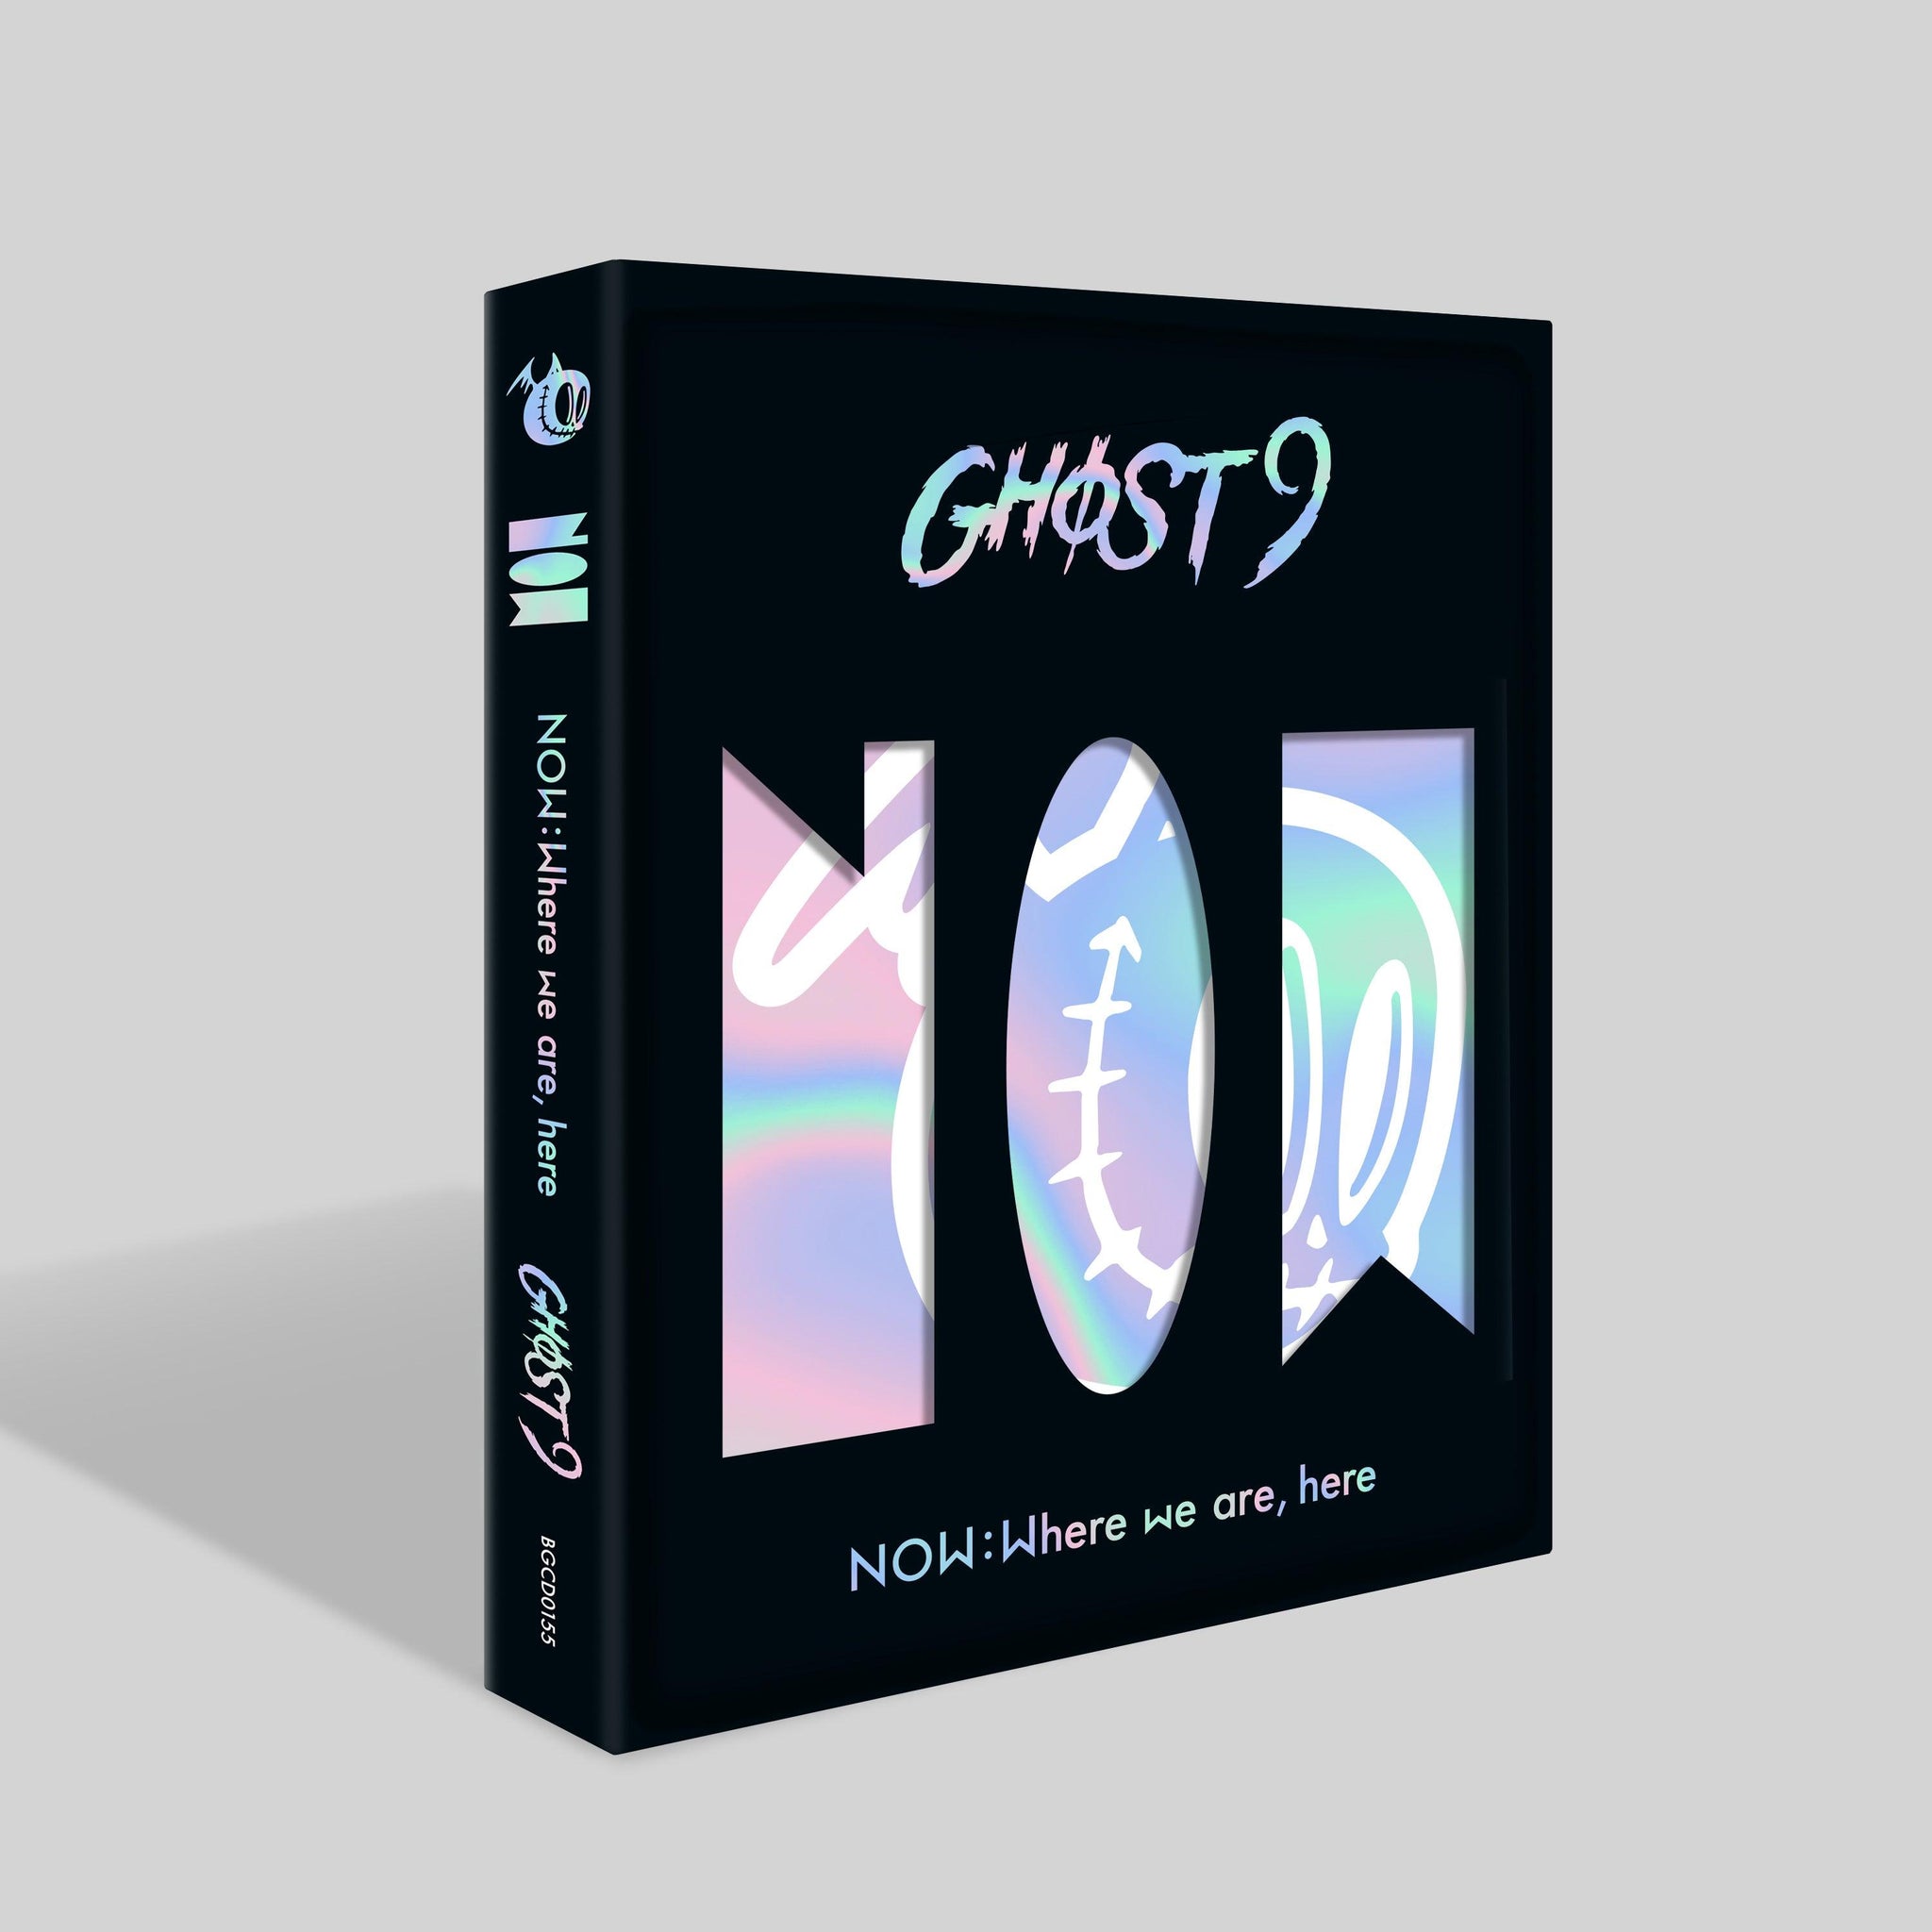 GHOST9 3RD MINI ALBUM 'NOW : WHERE WE ARE, HERE' + POSTER - KPOP REPUBLIC